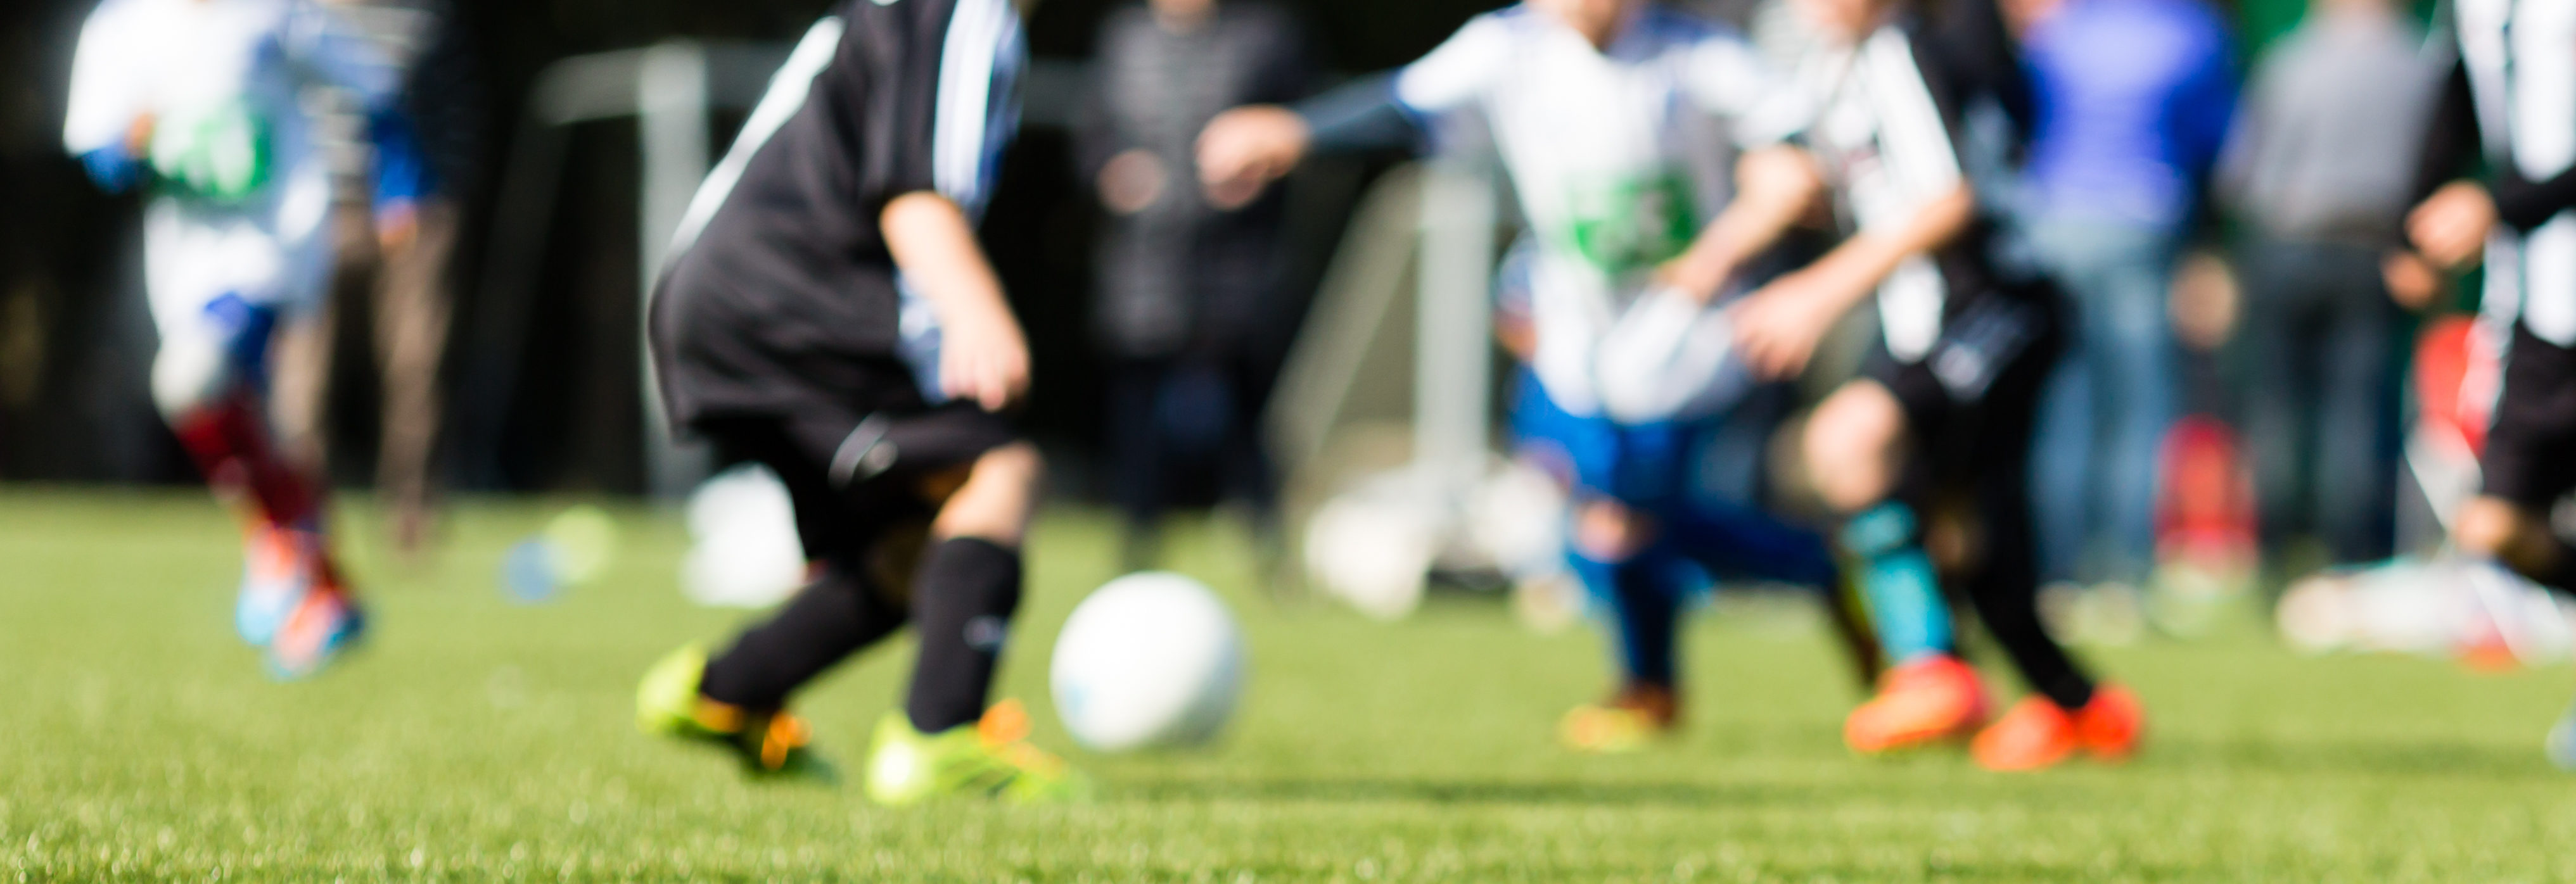 sexual abuse in youth sports